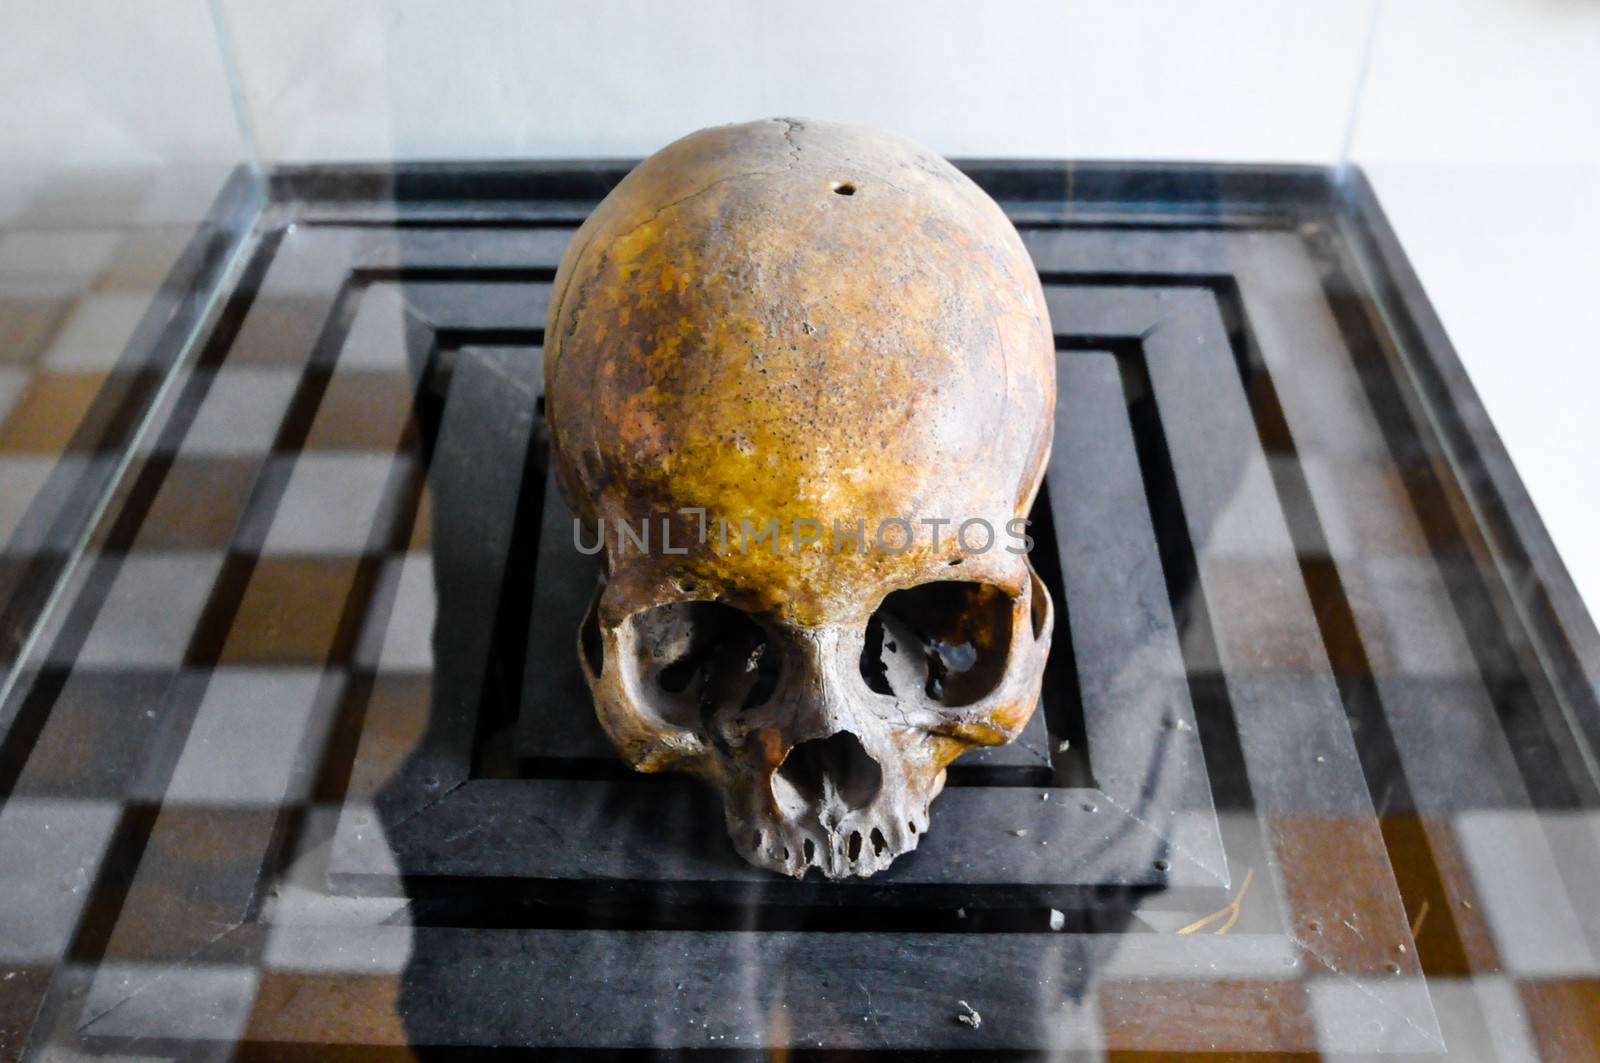 Skulls from the Killing Fields in Cambodia, this happened from around 1975 till 1979. Asia